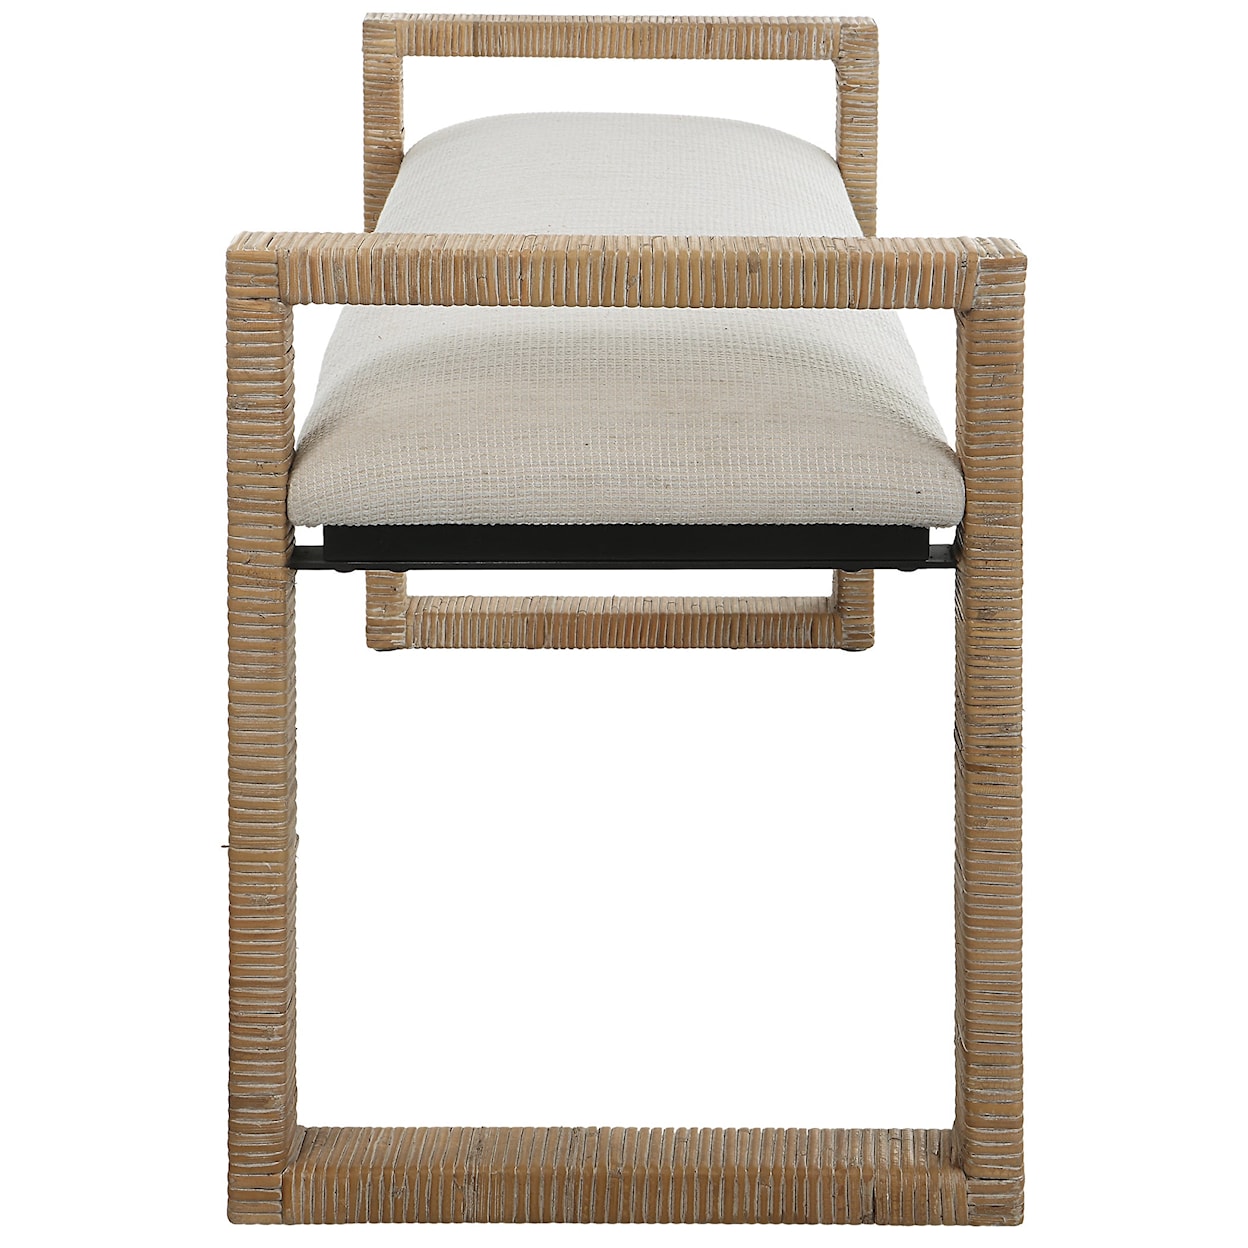 Uttermost Areca Rattan Bench with Upholstered Seat